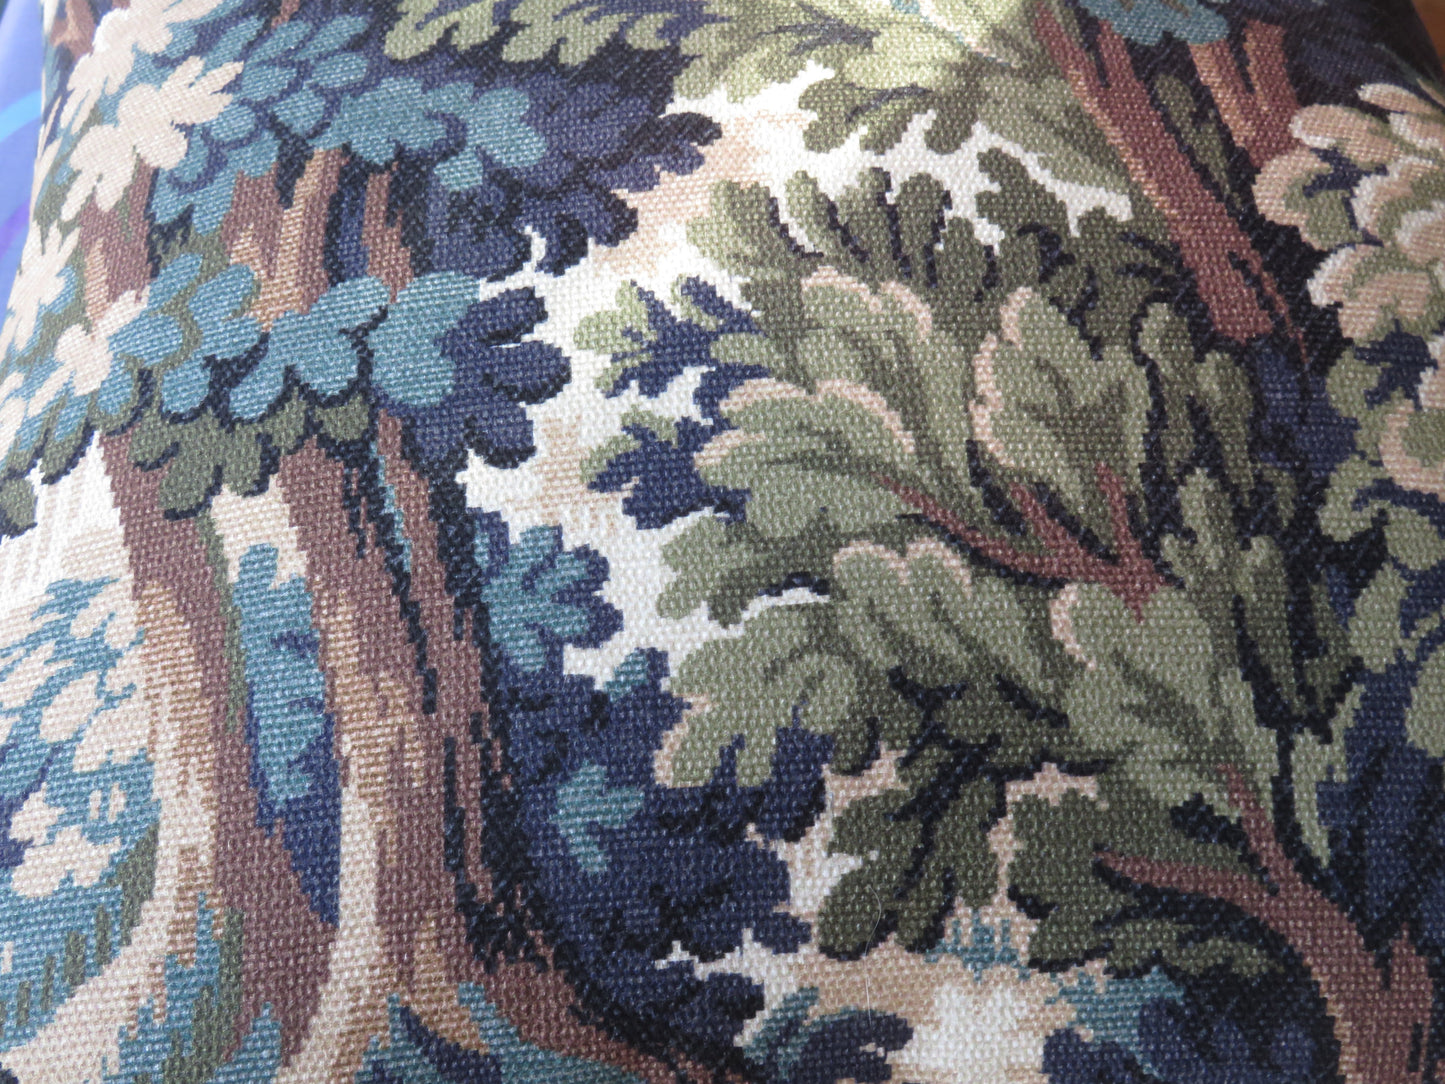 trees and leaves print pillow cover green blue brown tones